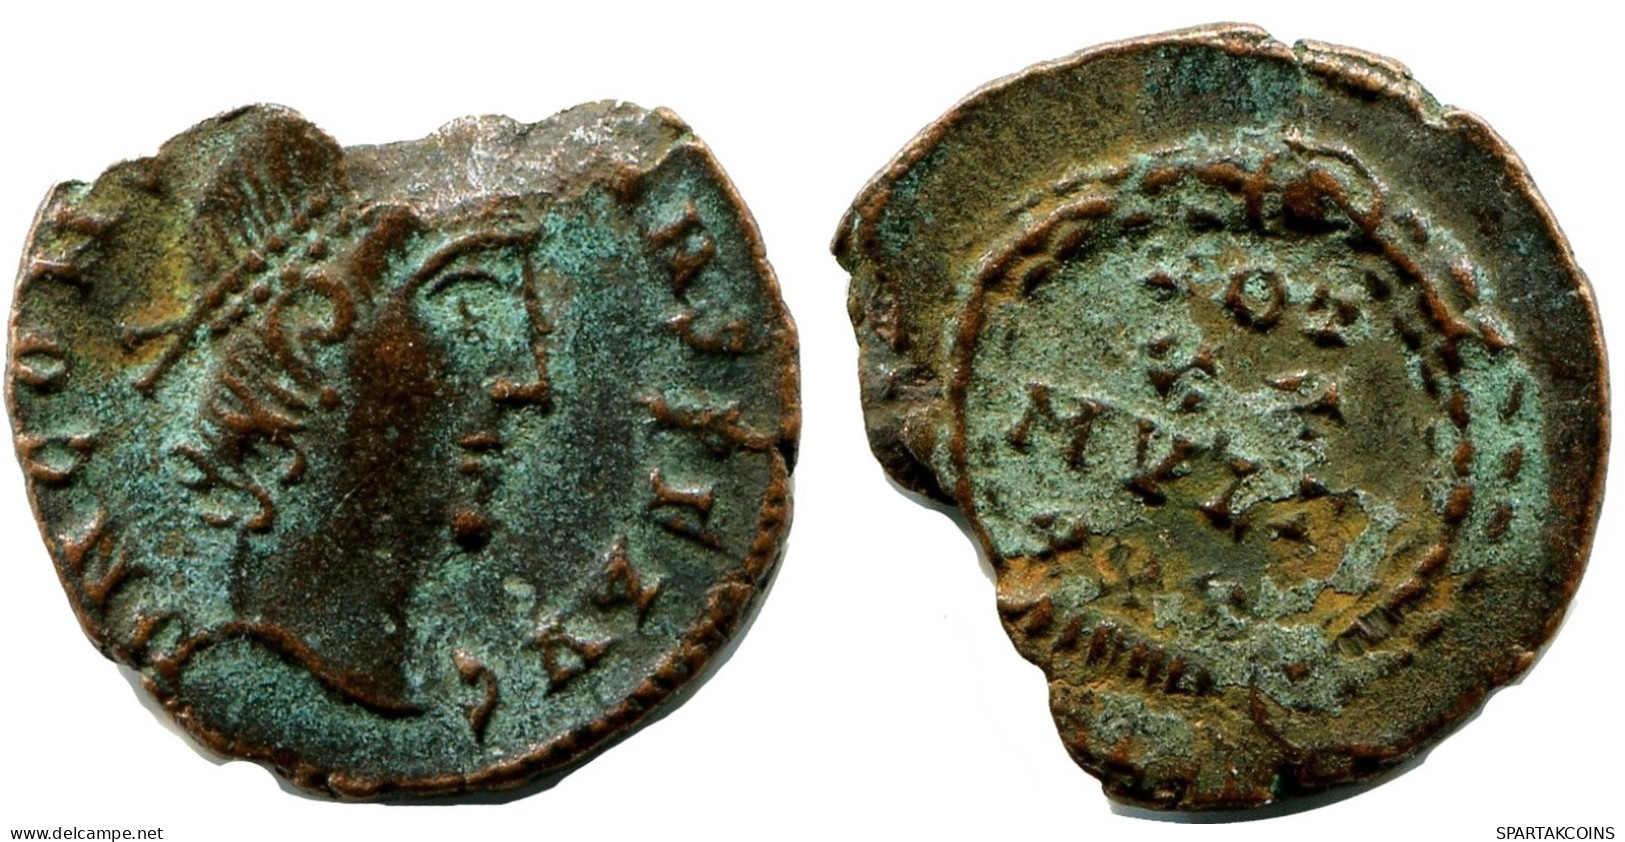 CONSTANS MINTED IN ALEKSANDRIA FROM THE ROYAL ONTARIO MUSEUM #ANC11481.14.D.A - The Christian Empire (307 AD To 363 AD)